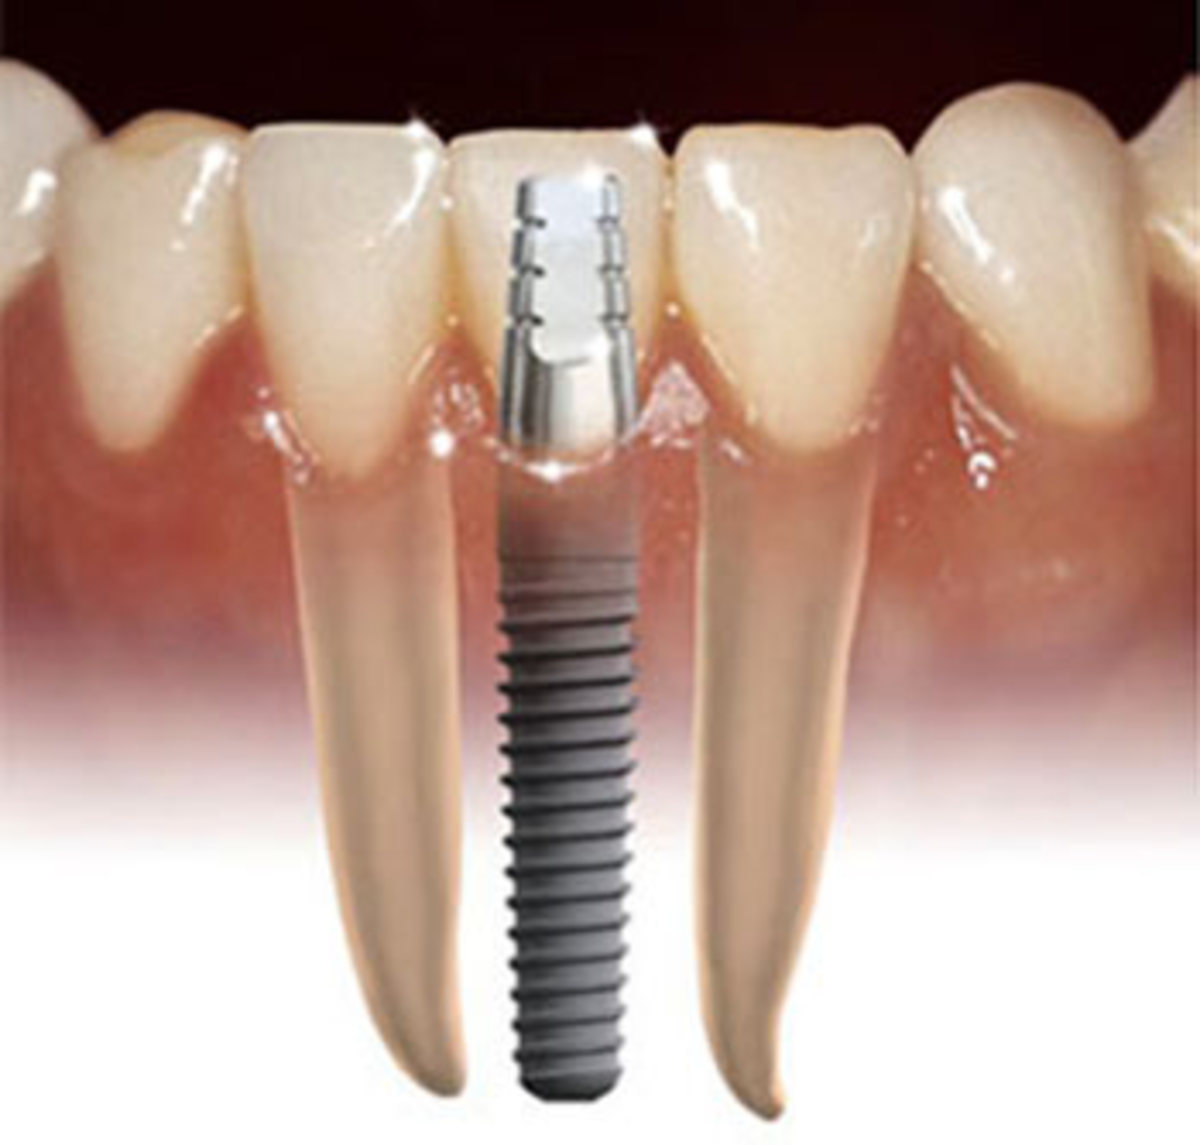 How to Get Free Dental Implants